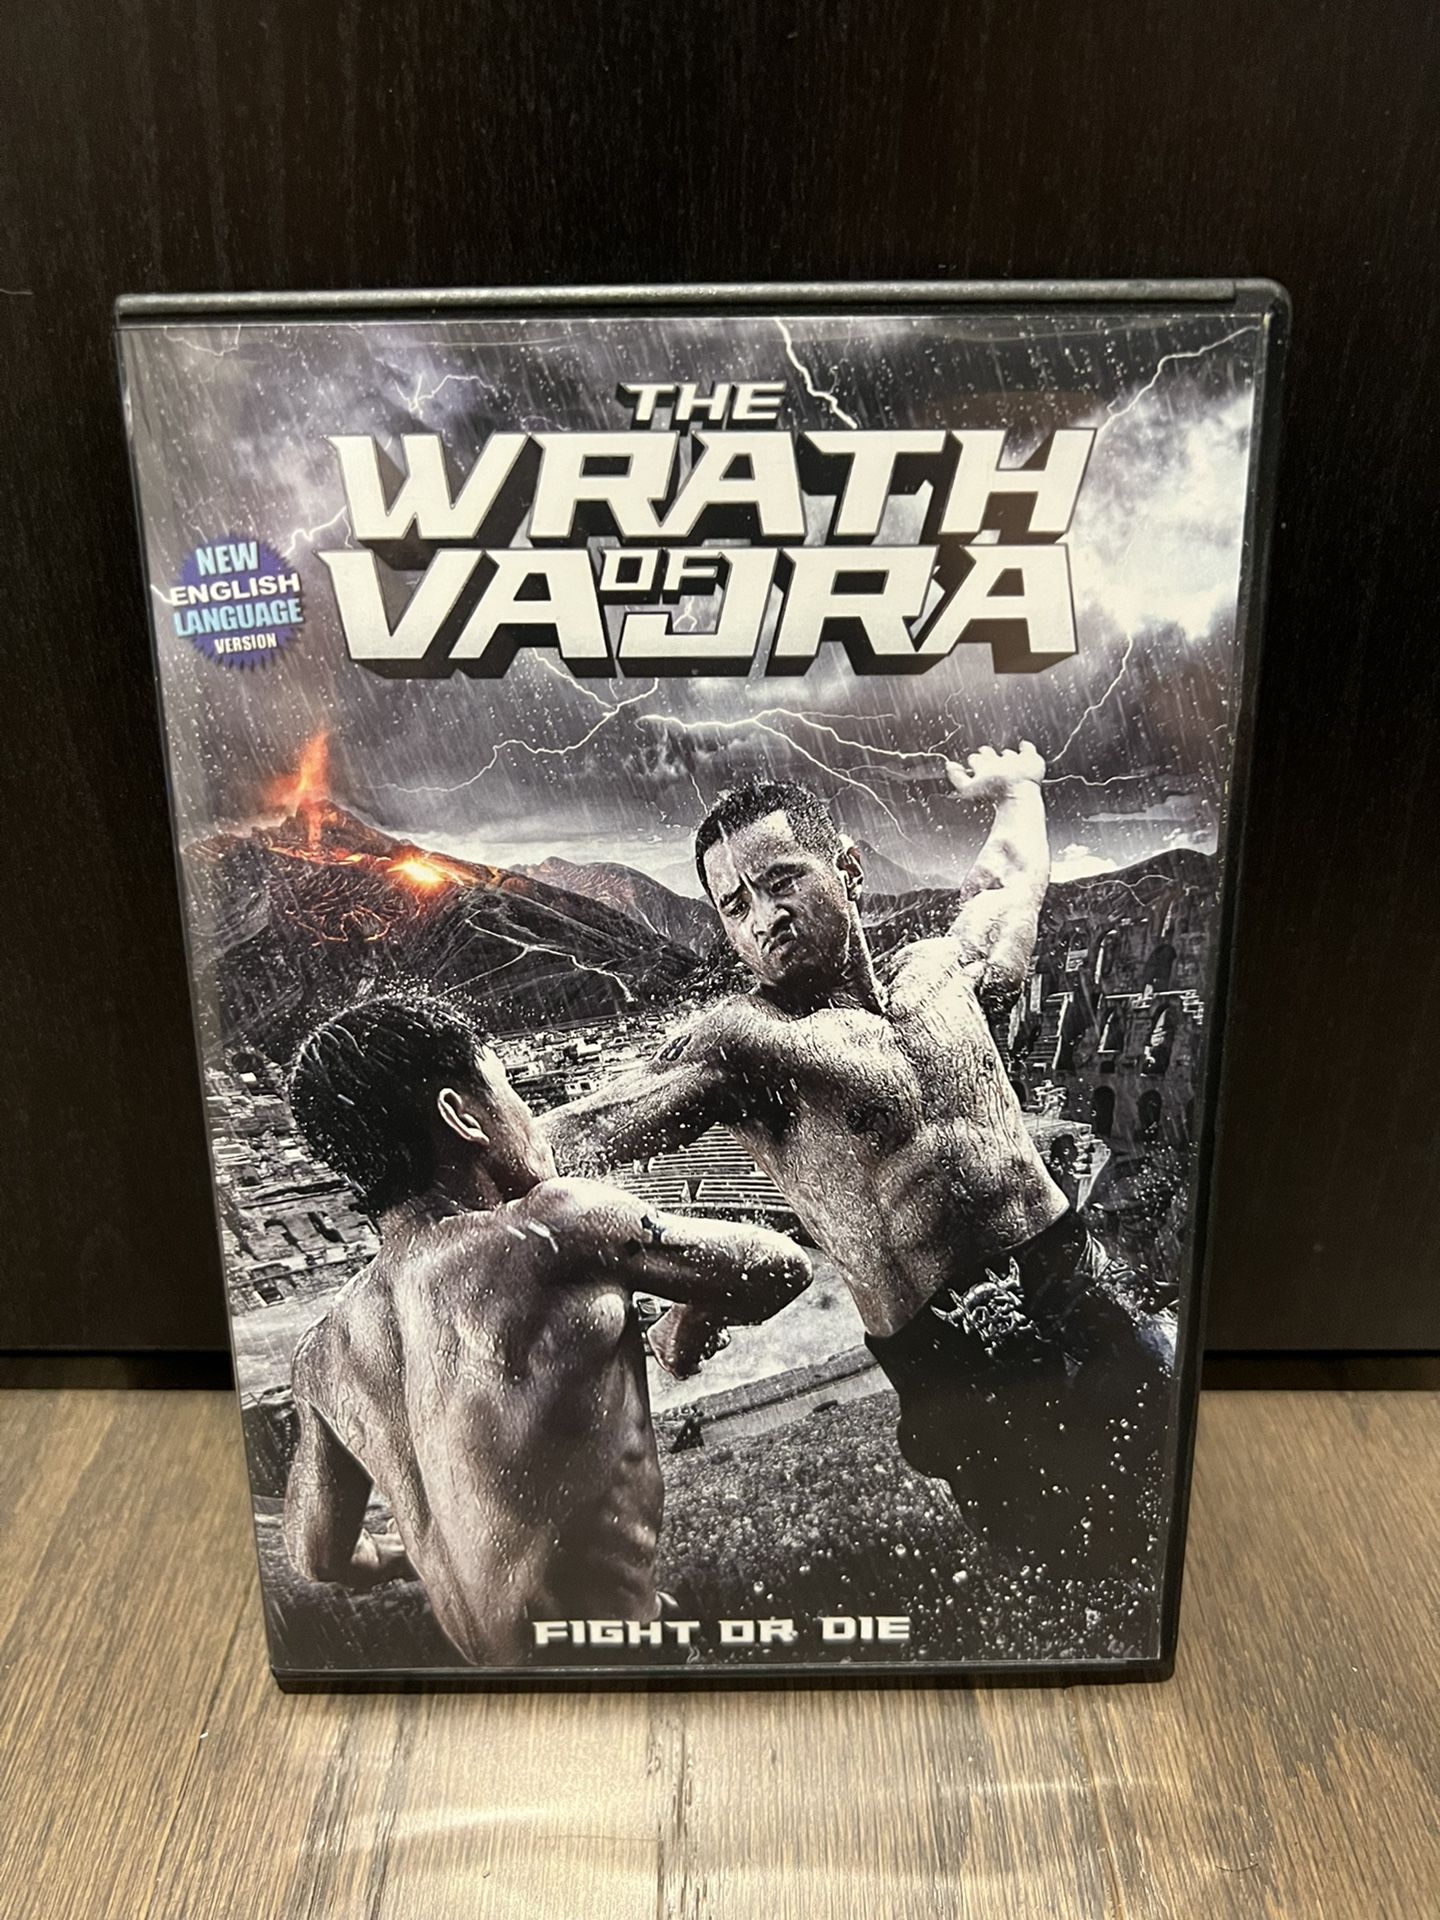 The Wrath of Vajra Movie DVD with Case NO MEETUPS